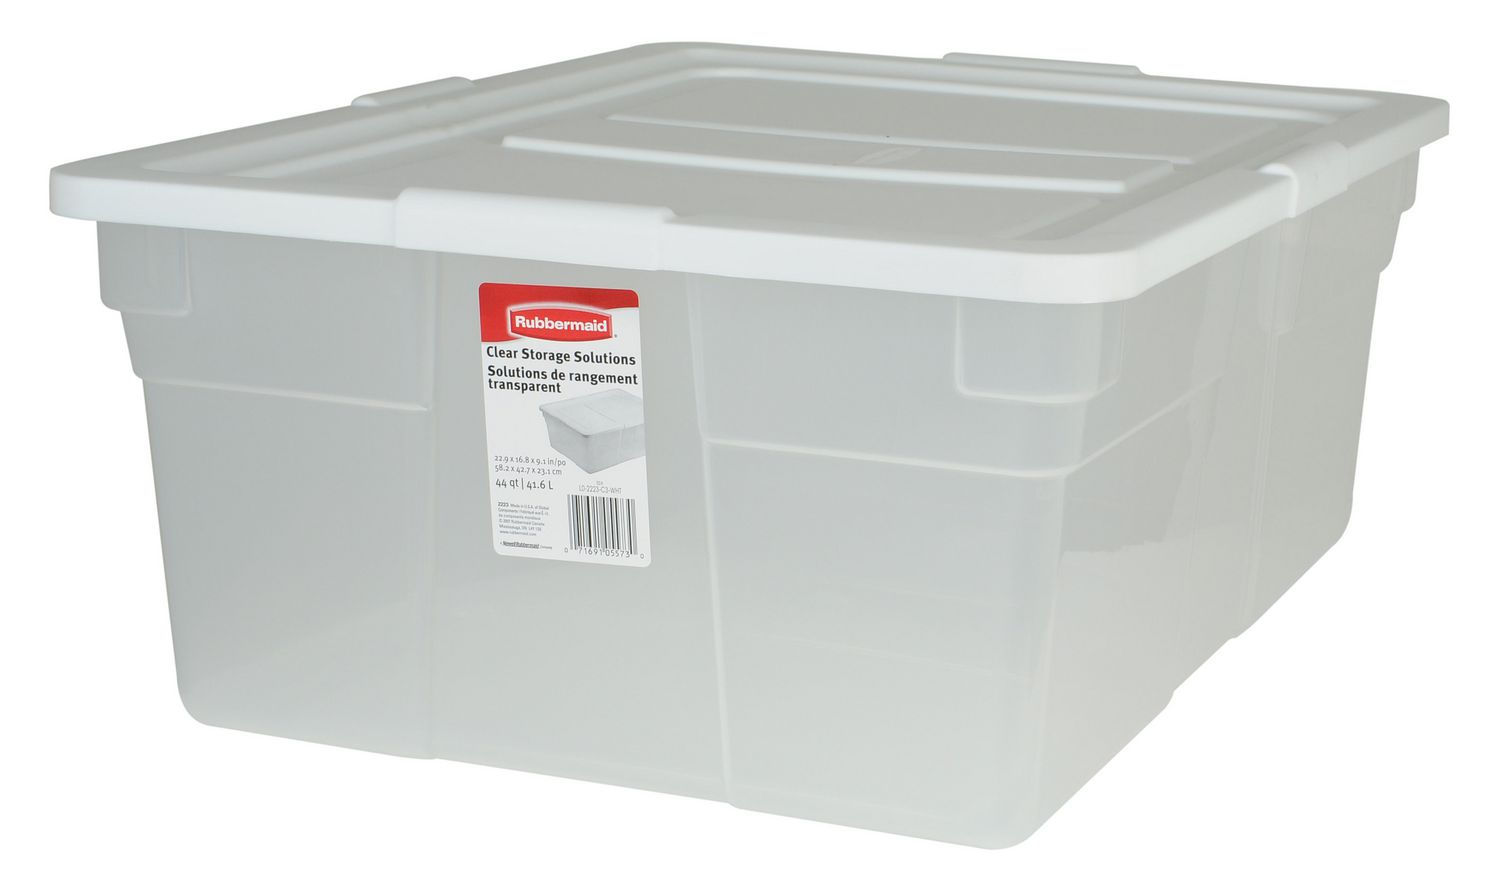 Rubbermaid 416 L Storage Container Walmart Canada within measurements 1500 X 891